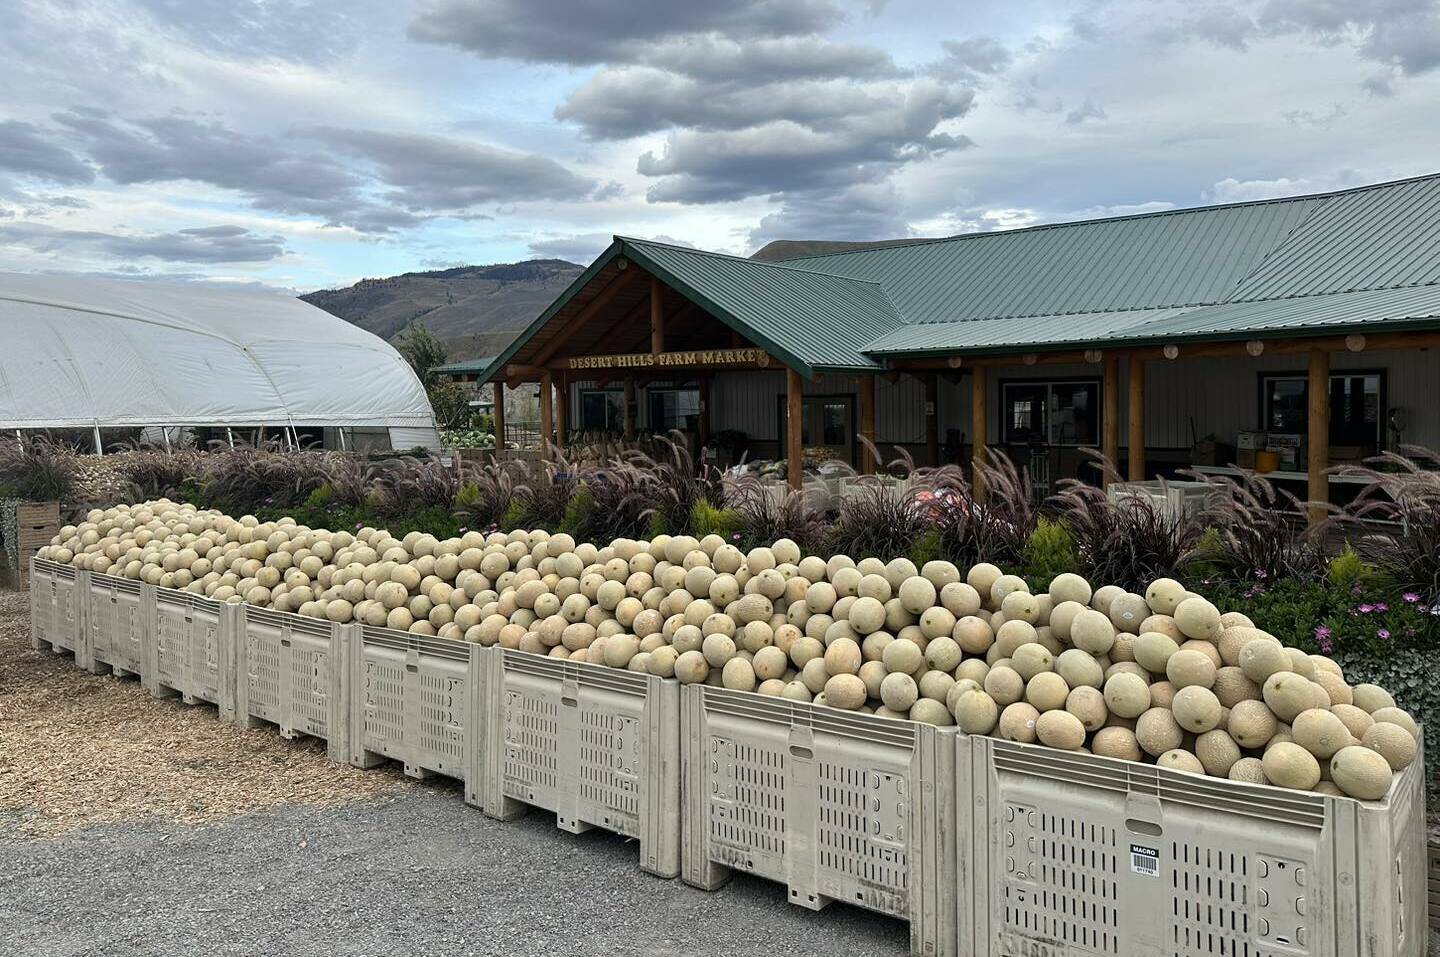 Desert Hills Ranch Farm Market ordered a large shipment of cantaloupe, only for it to arrive undersized. The market is giving away the fruit for free and asks the community to consider donating to food banks and others in need. (Desert Hills Ranch Farm Market/Facebook)